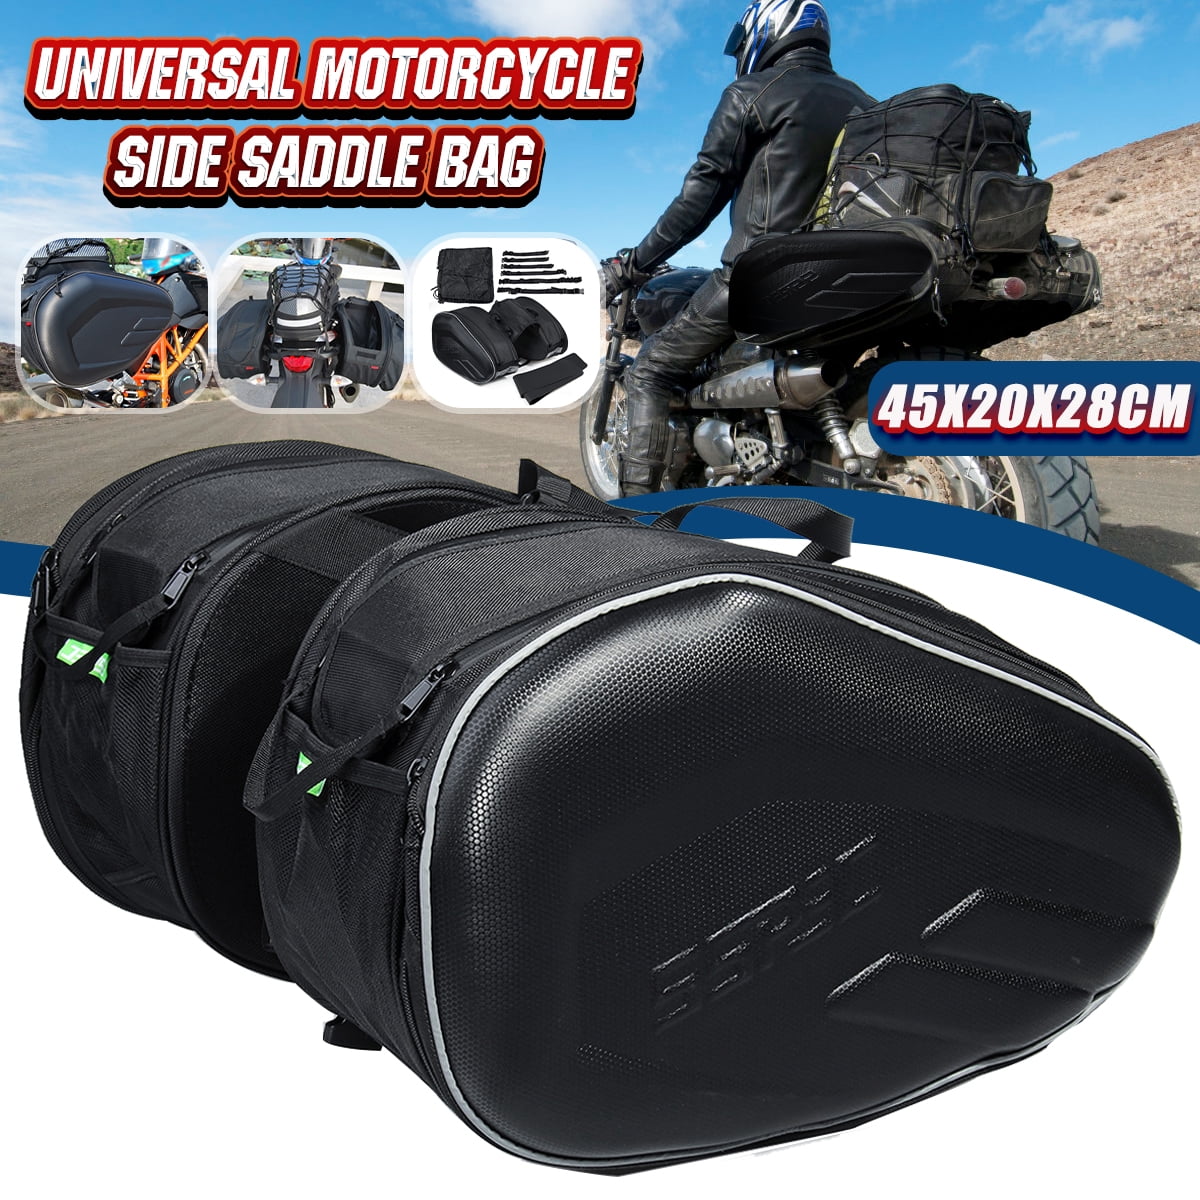 Motorcycle Pannier Bags Luggage Saddle Bag with Rain Cover Universal Black New 